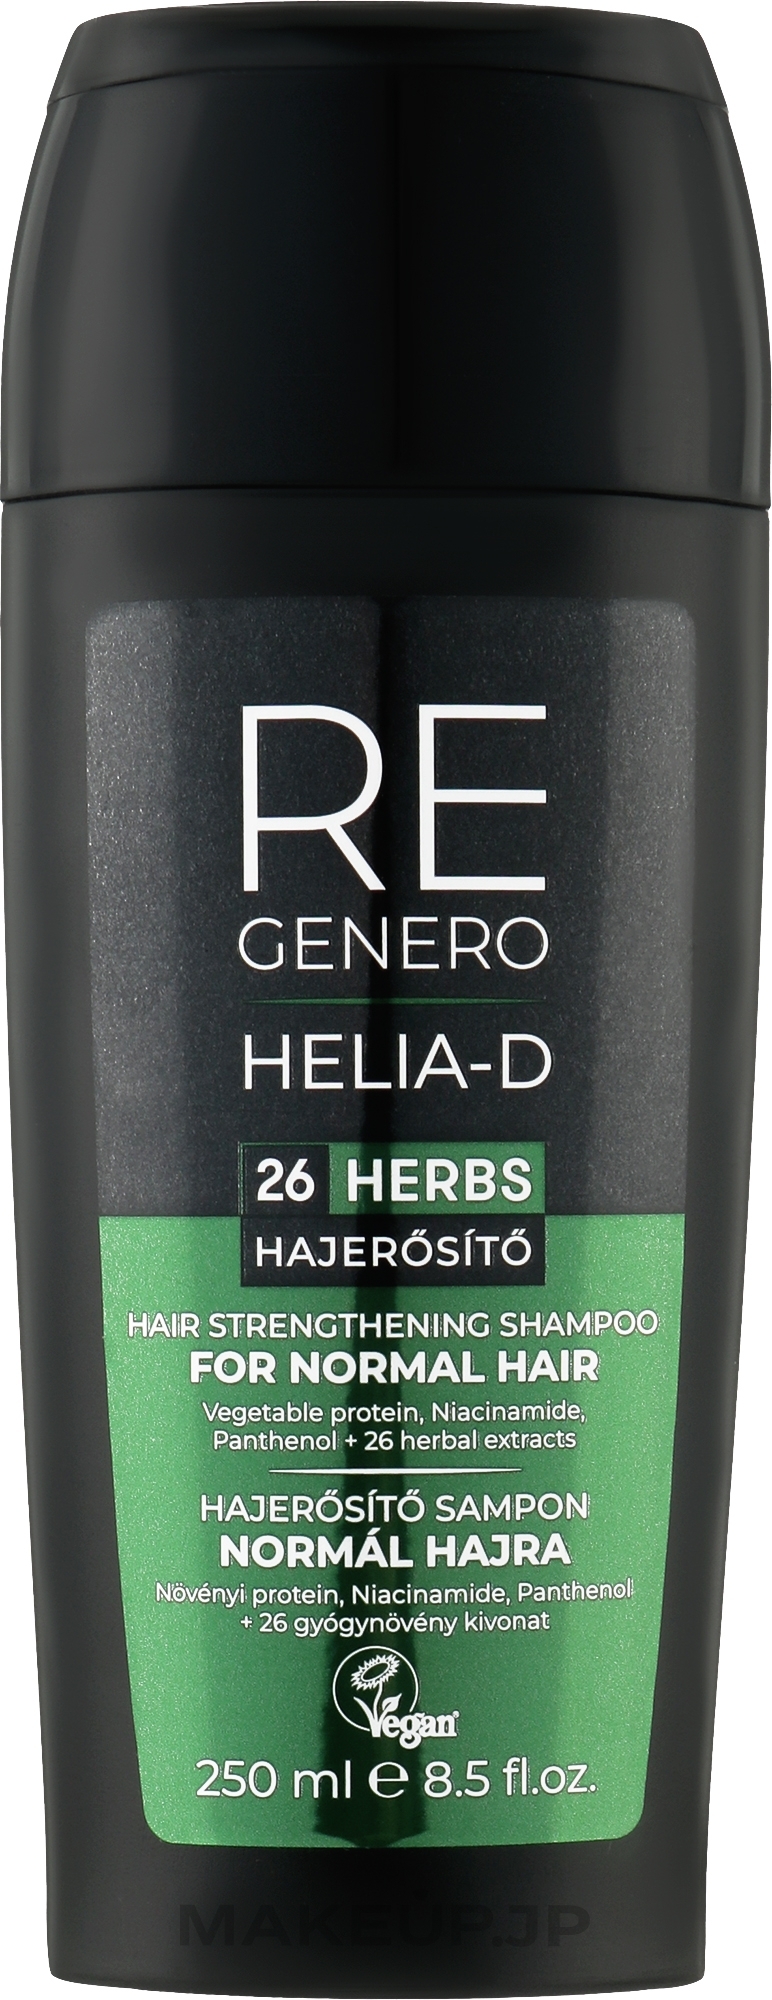 Strengthening Shampoo for Normal Hair - Helia-D Regenero Normal Hair Strenghtening Shampoo — photo 250 ml